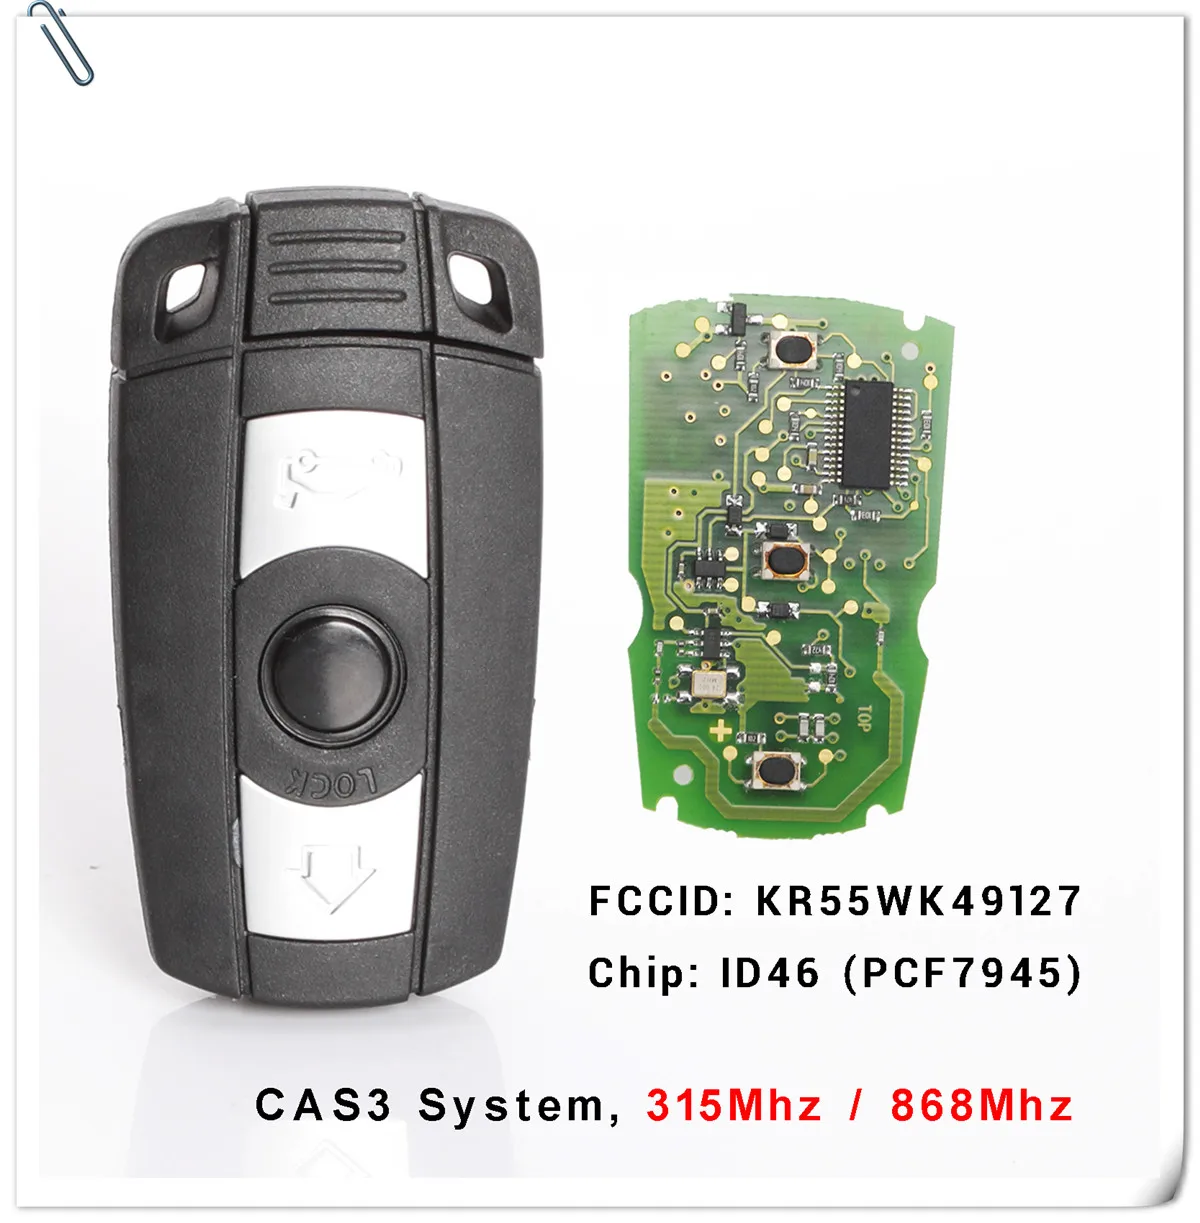 Remoto Chave para a BMW 868 Mhz